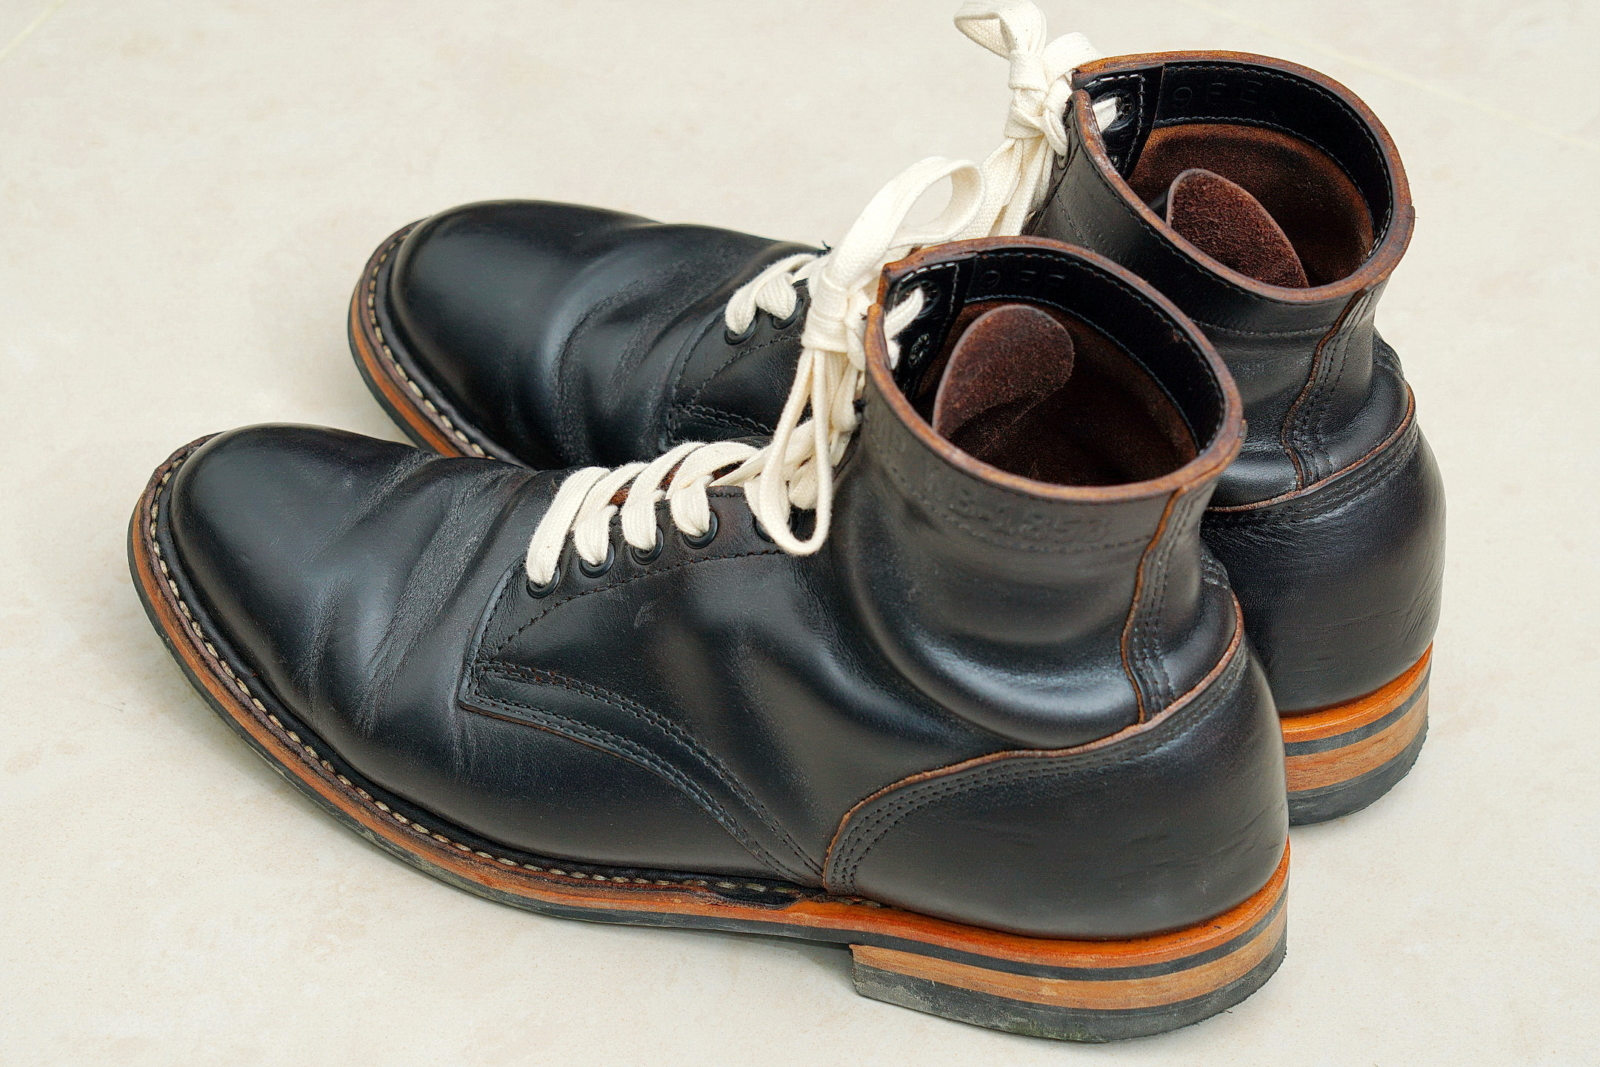 White's MP Service Boots 5Inches Horween CXL BLK 軍警靴，外觀4